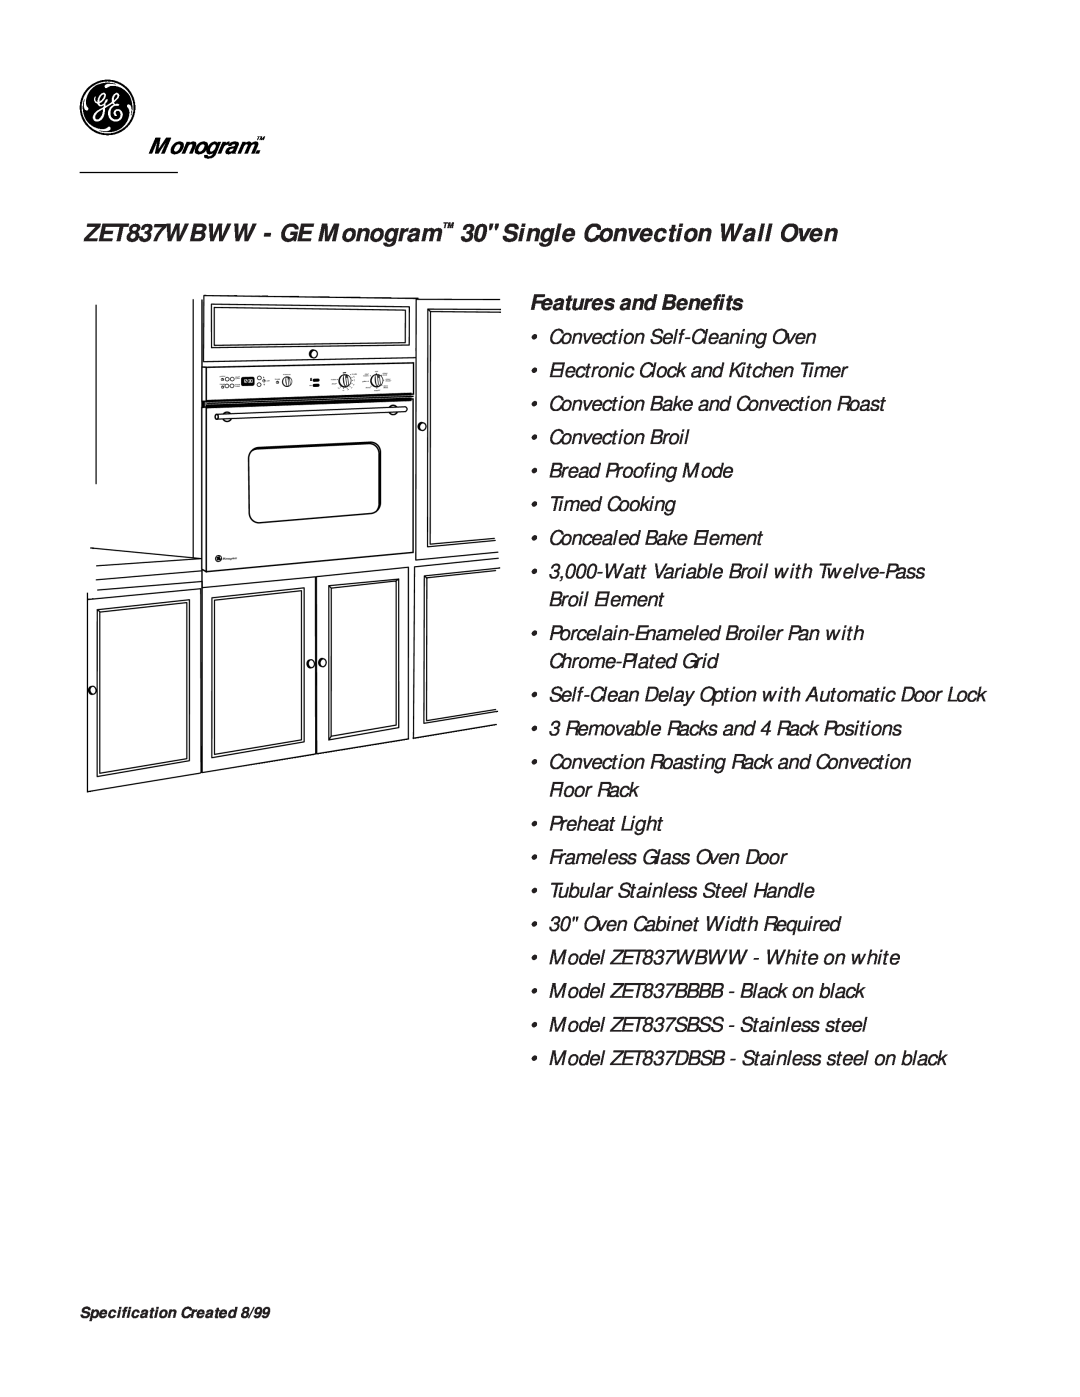 GE Monogram dimensions Features and Benefits, ZET837WBWW - GE Monogram 30 Single Convection Wall Oven 